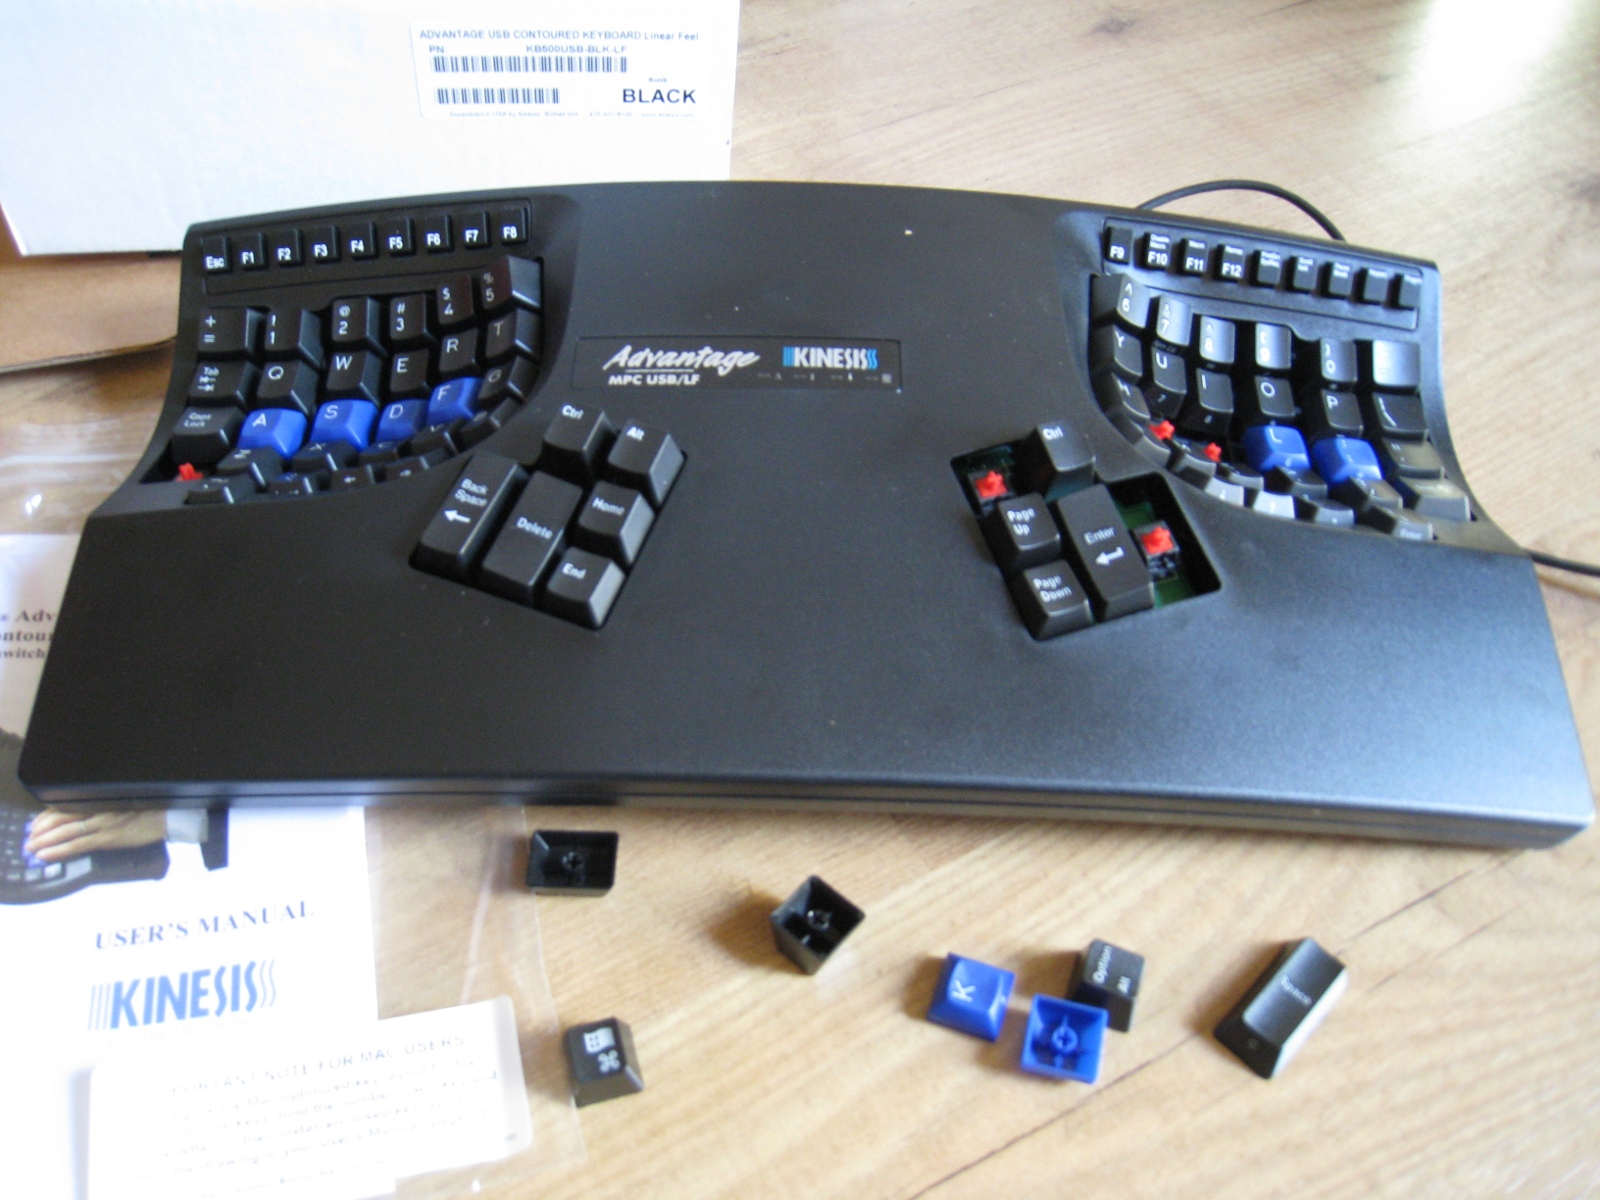 Keyboard unboxed and switches revealed